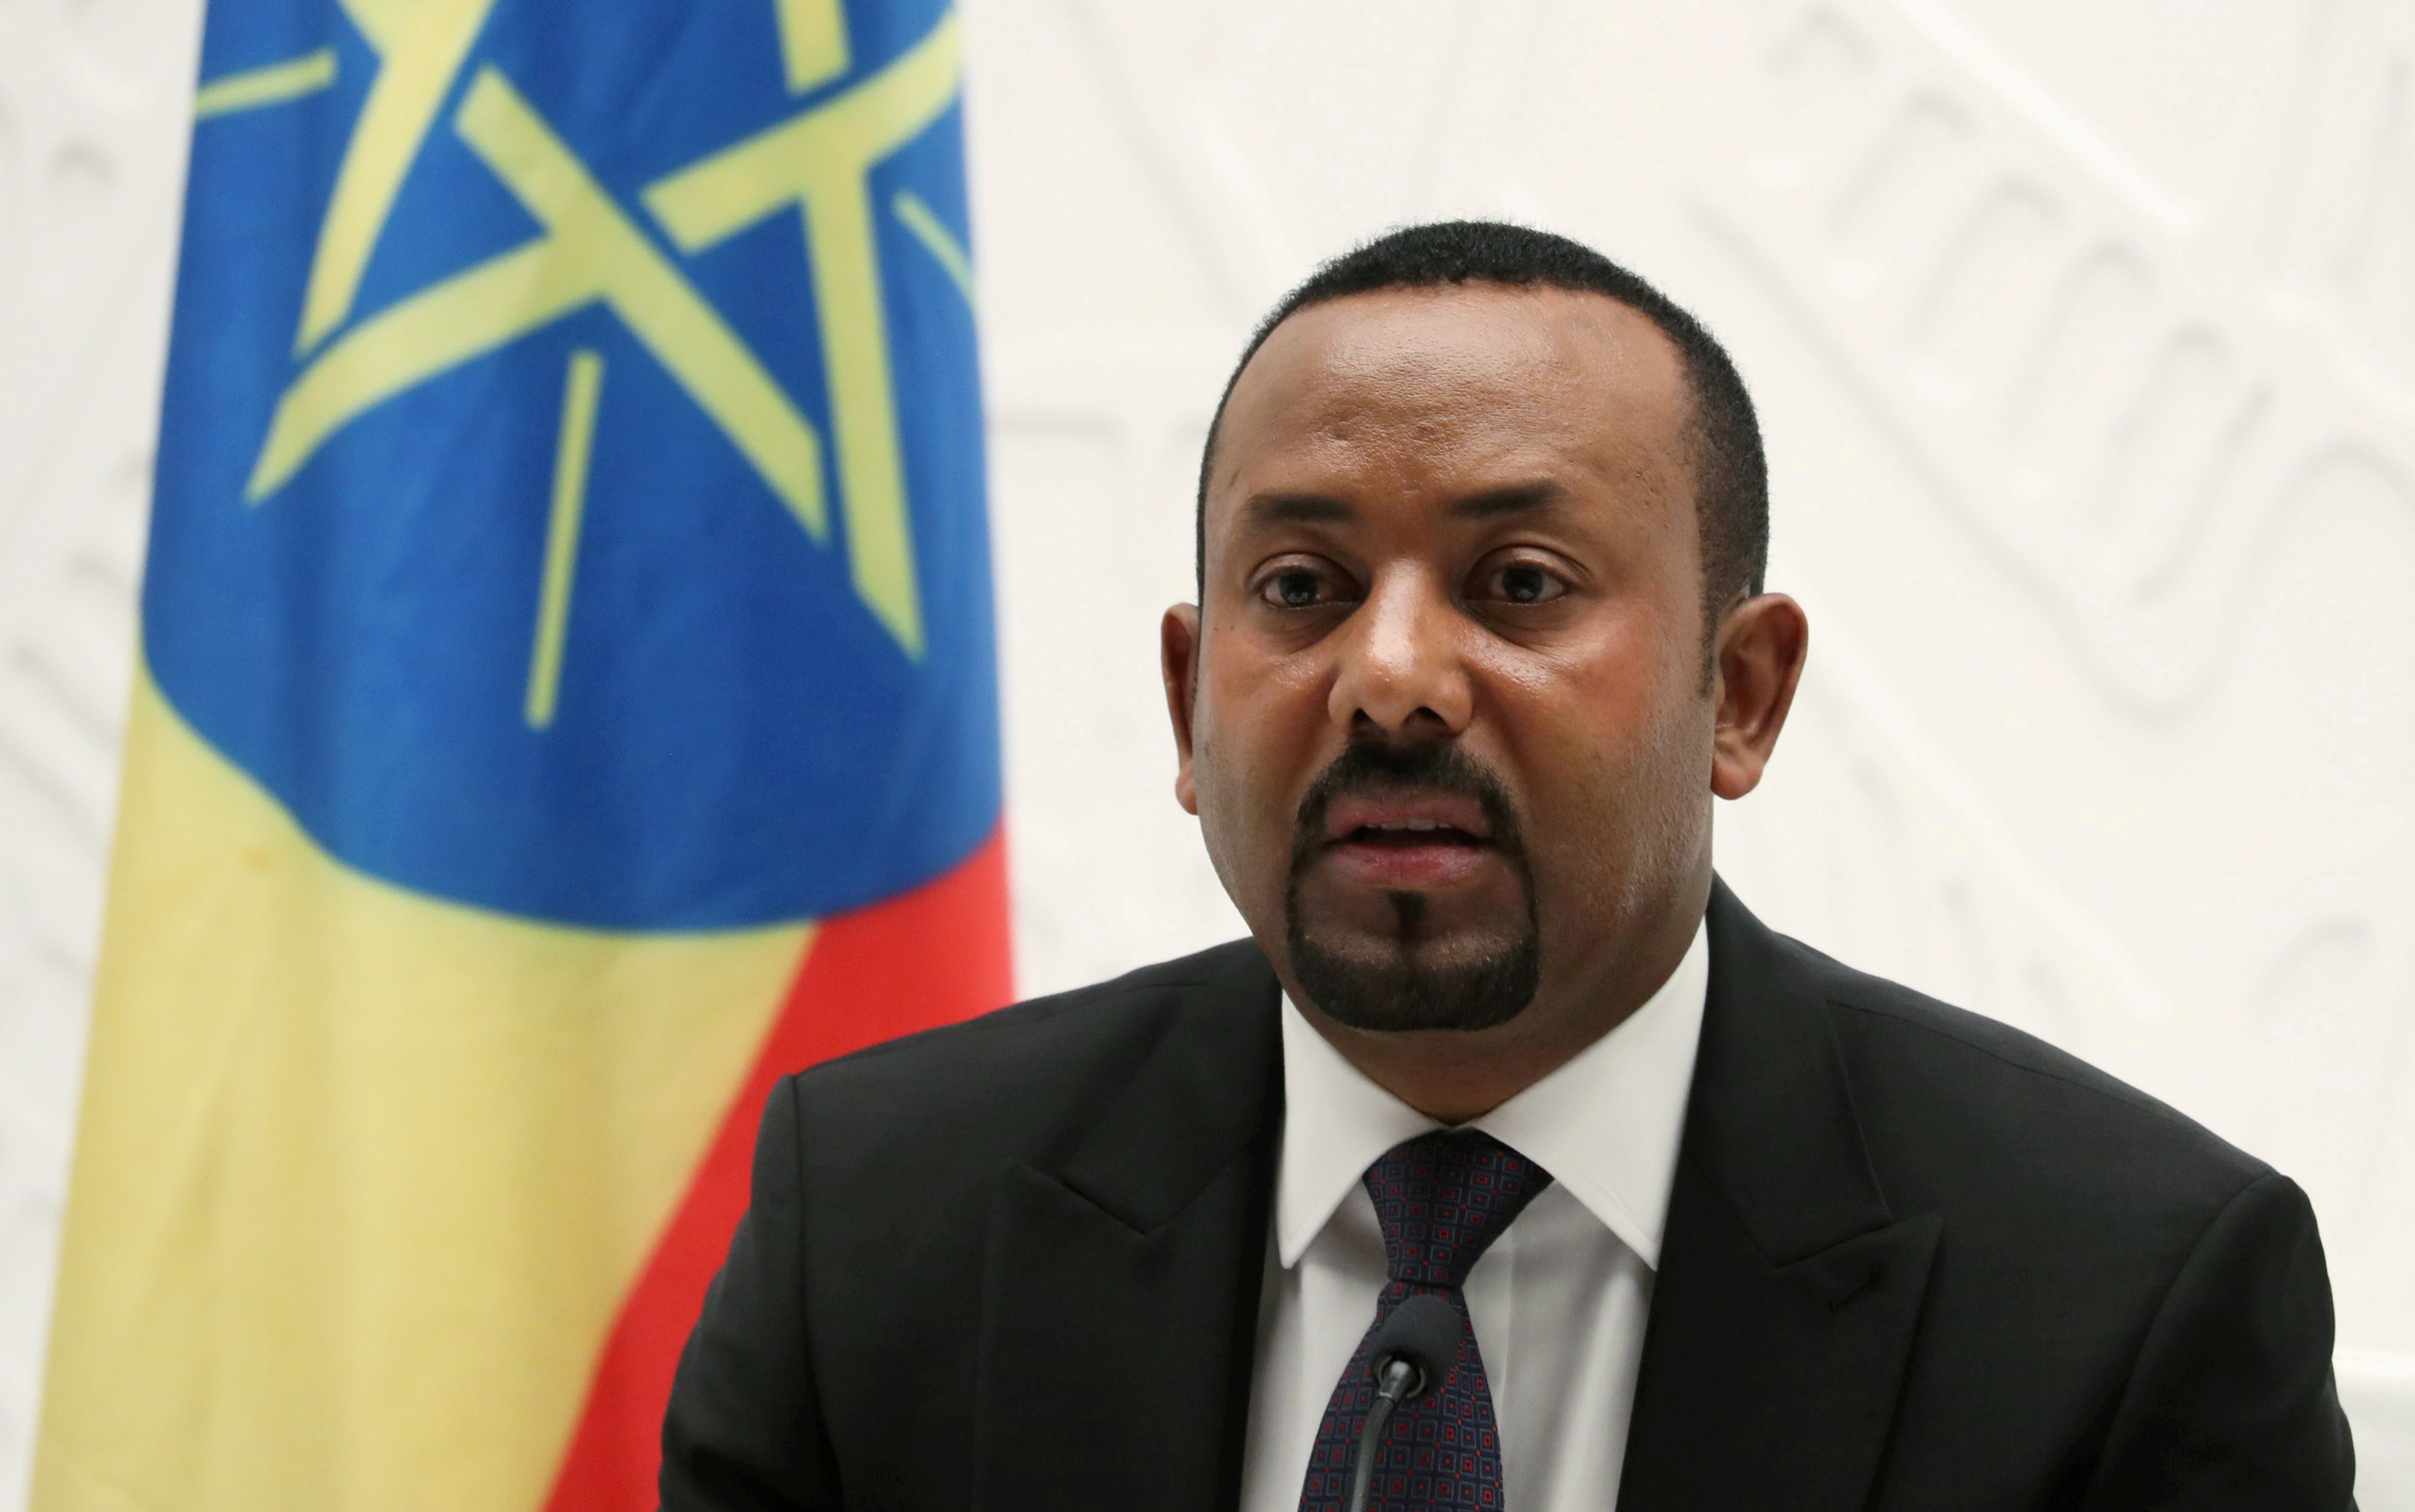 Ethiopia's Prime Minister Abiy Ahmed speaks at a news conference at his office in Addis Ababa